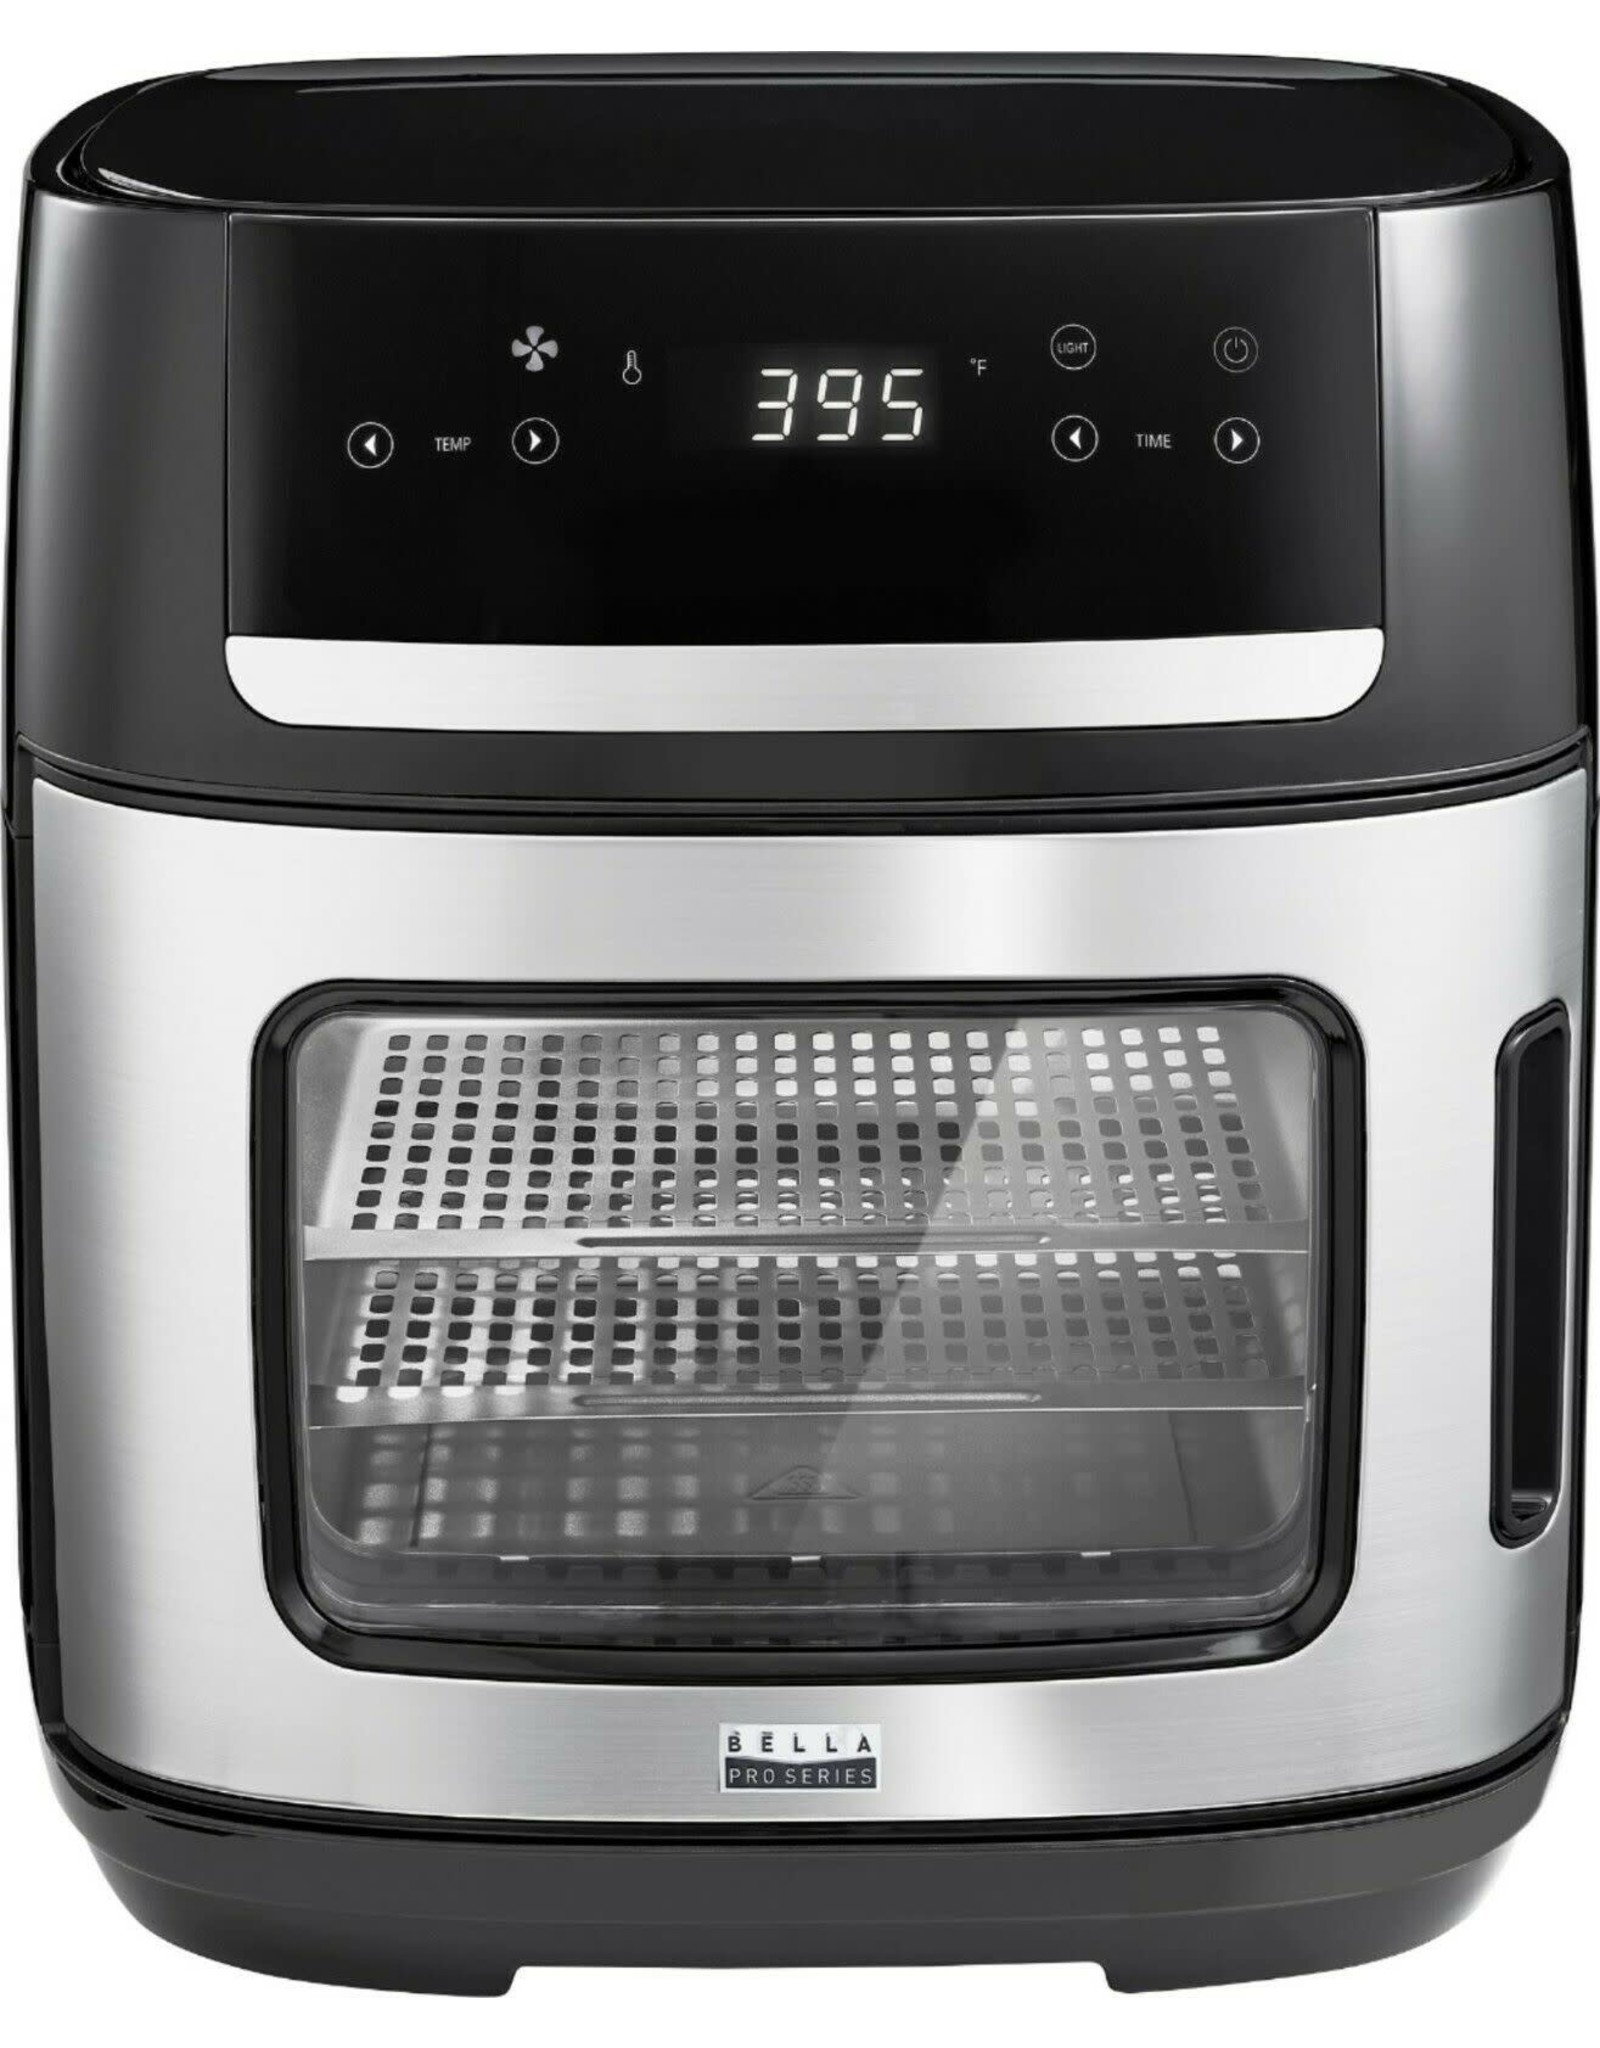 90116 Bella Pro Series - 4-Slice Convection Toaster Oven + Air Fryer with  Dehydrator & Rotisserie Settings - Stainless Steel - Black Friday